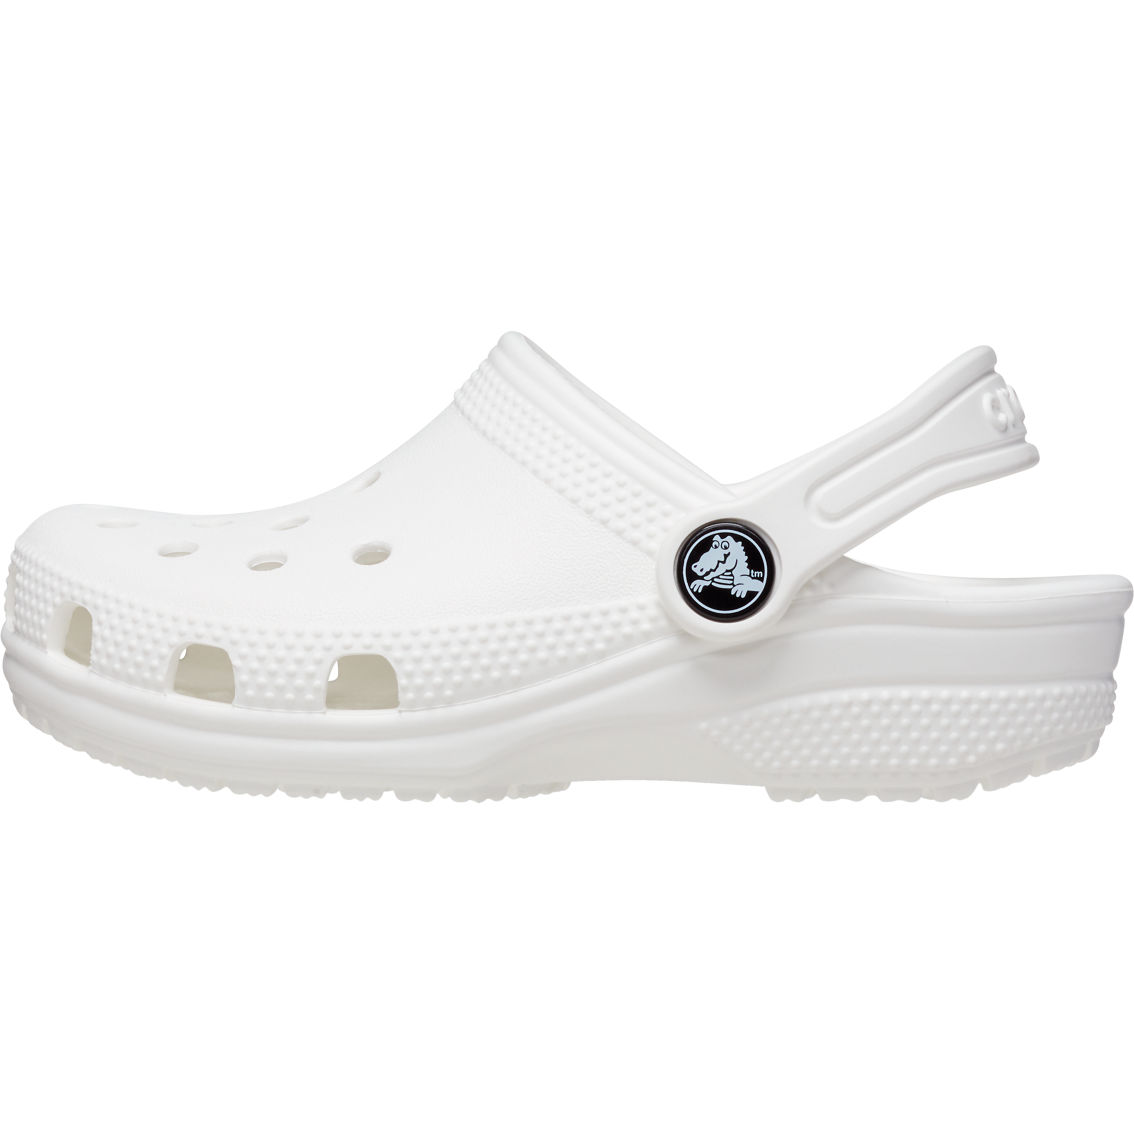 Crocs Toddlers Classic Clogs - Image 2 of 5